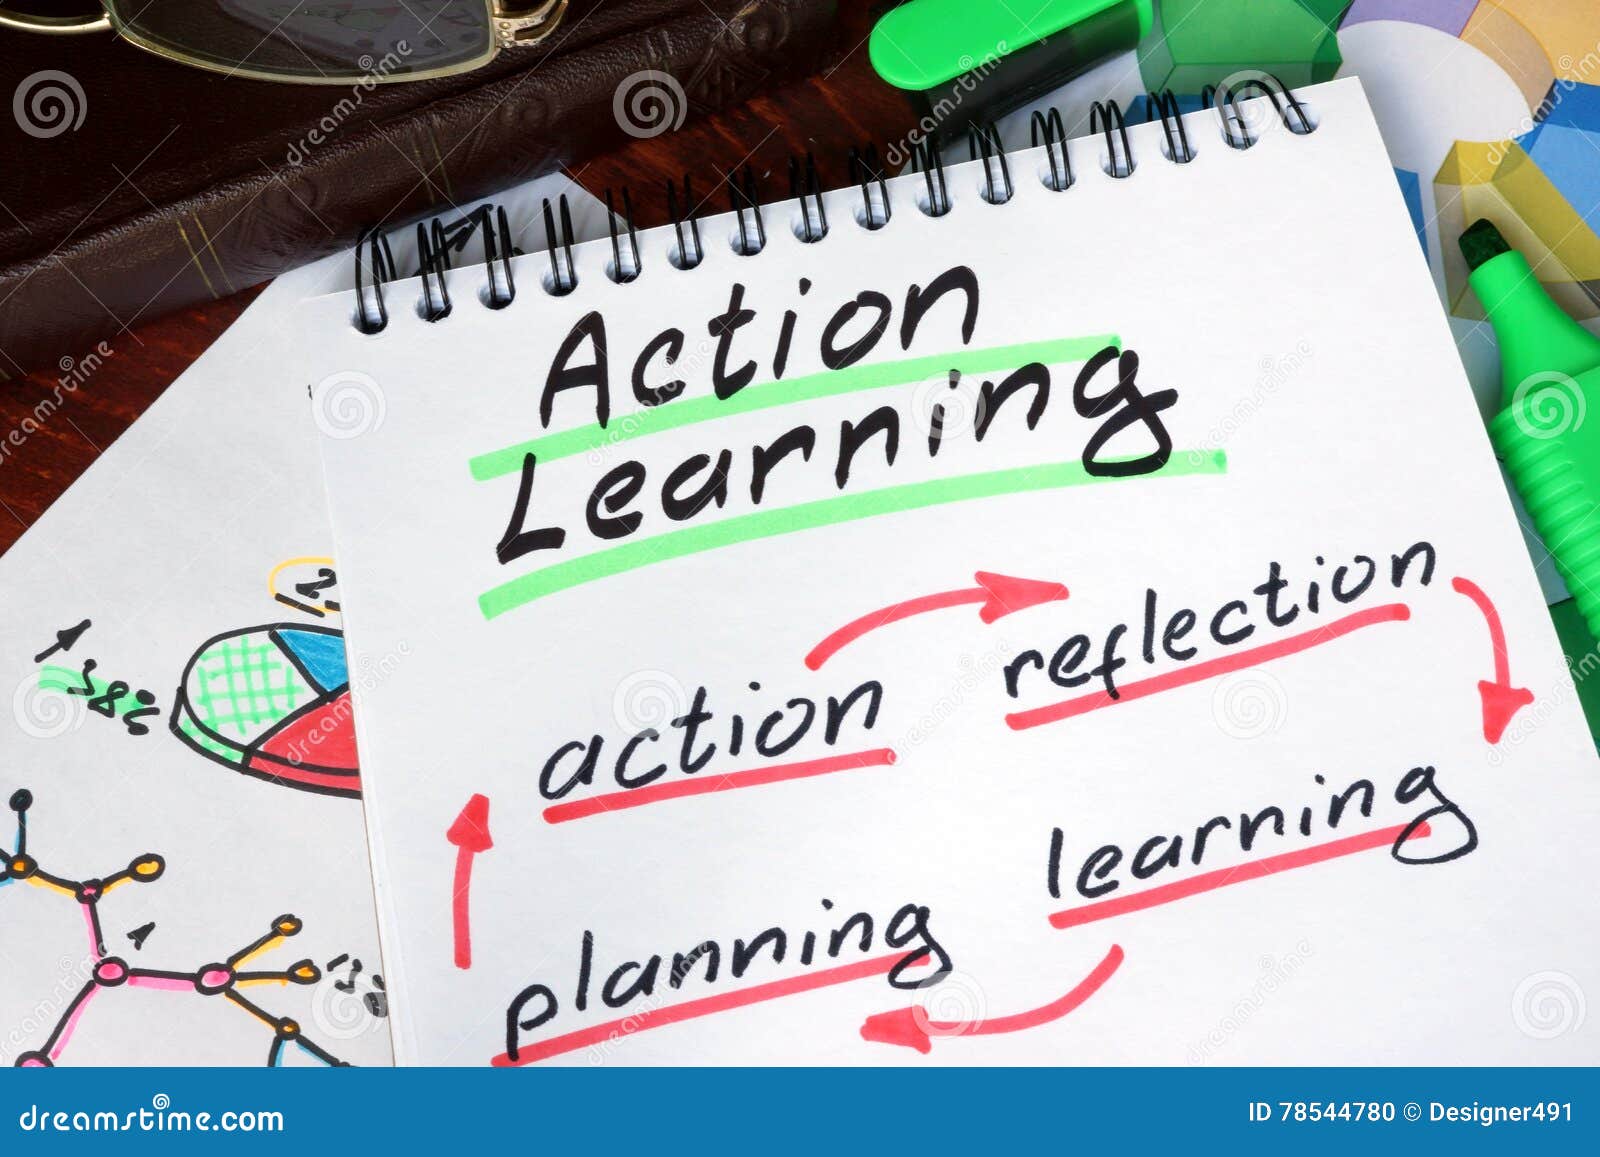 notepad with action learning